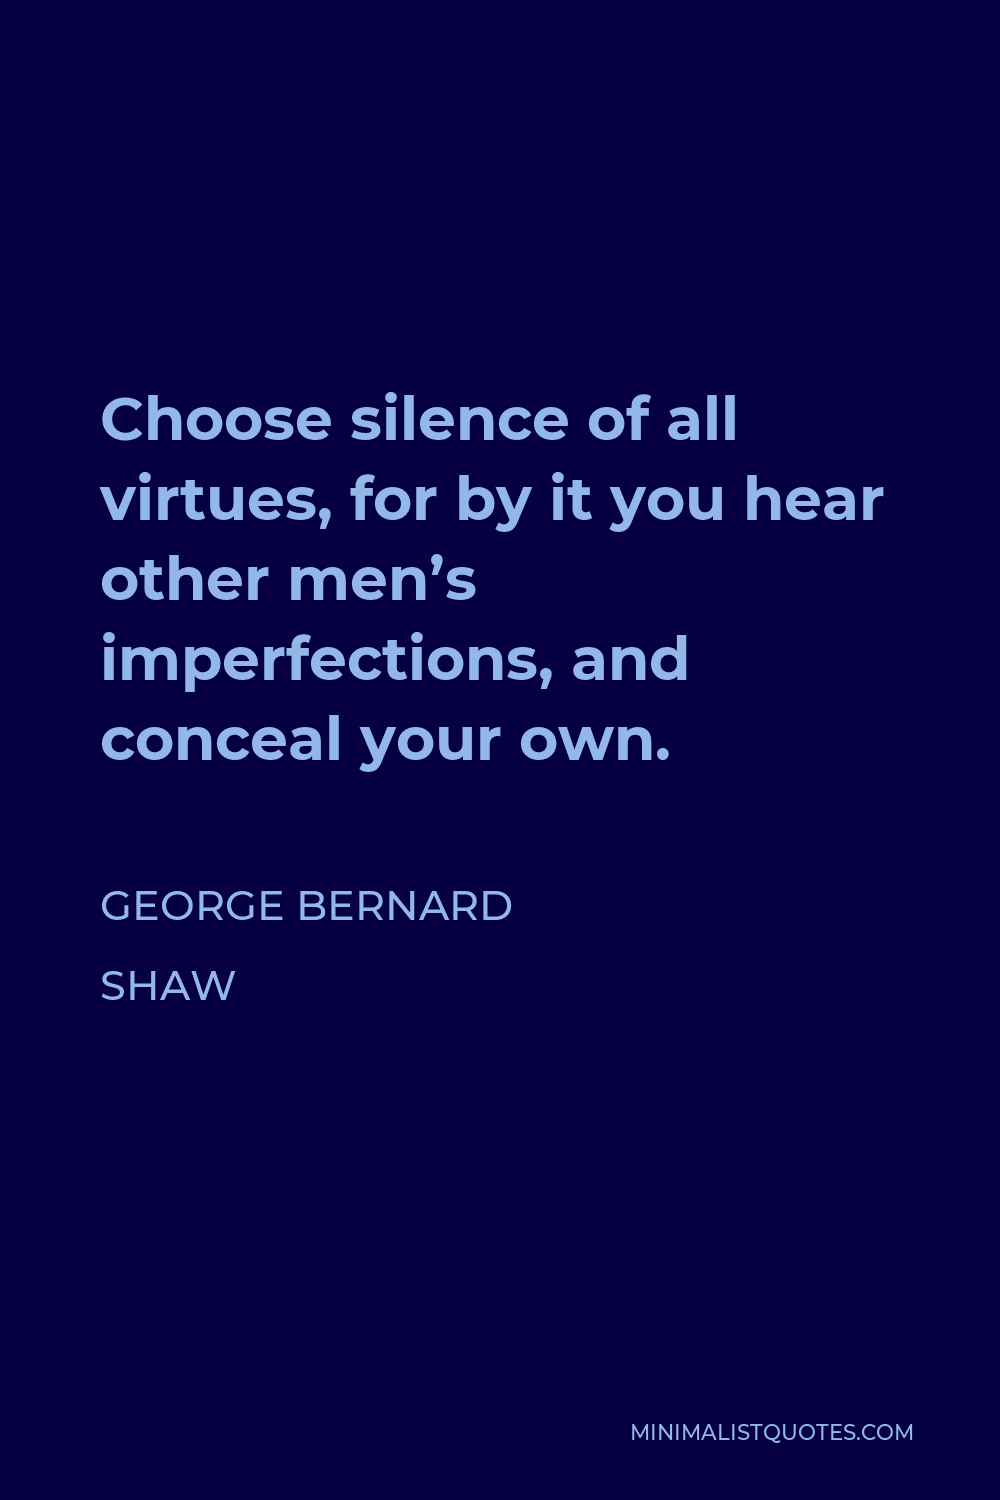 George Bernard Shaw Quote - Choose silence of all virtues, for by it you hear other men’s imperfections, and conceal your own.